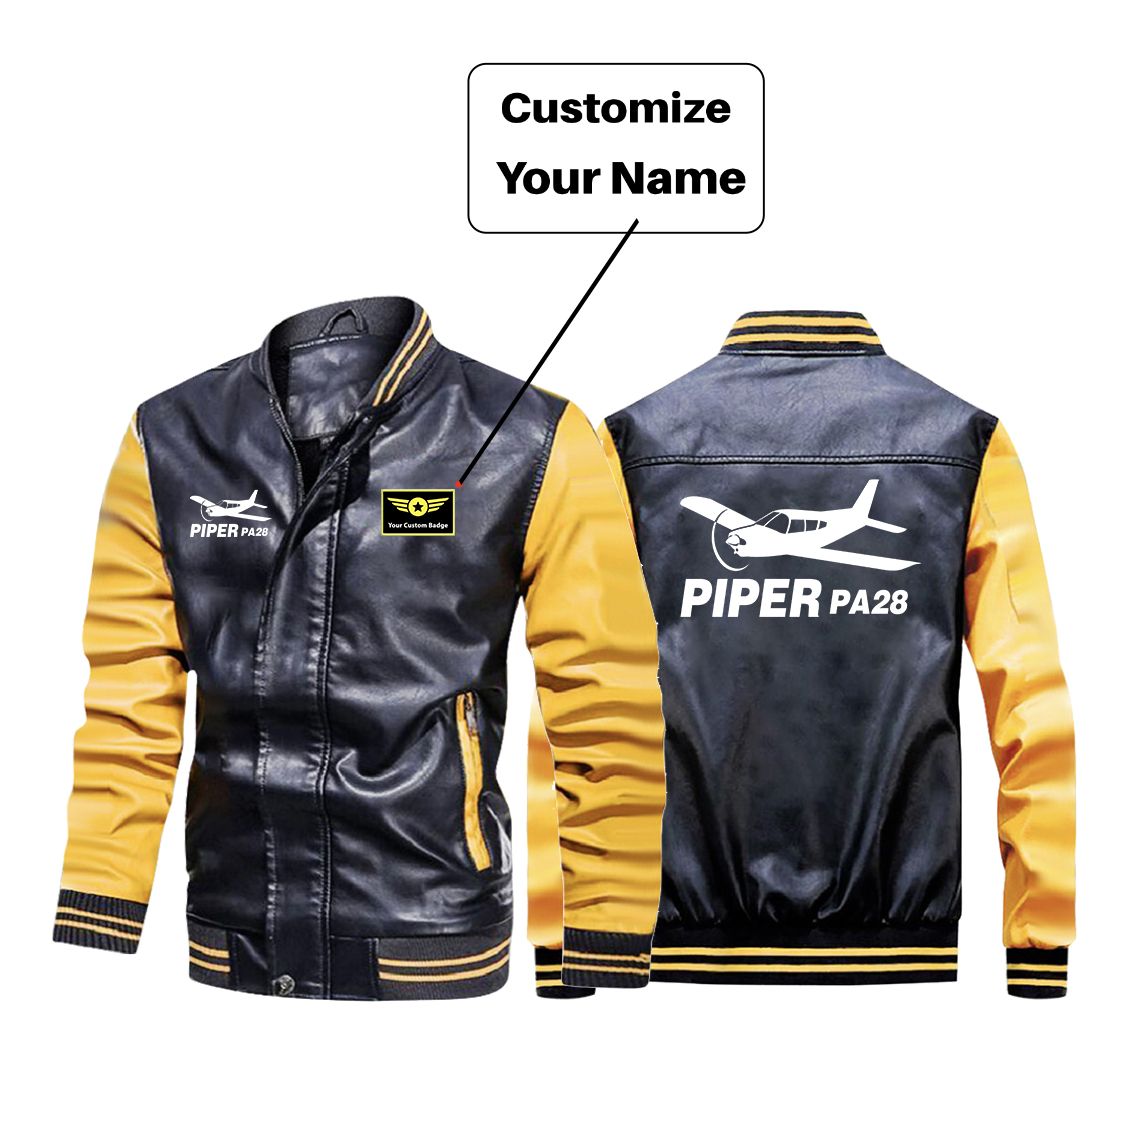 The Piper PA28 Designed Stylish Leather Bomber Jackets